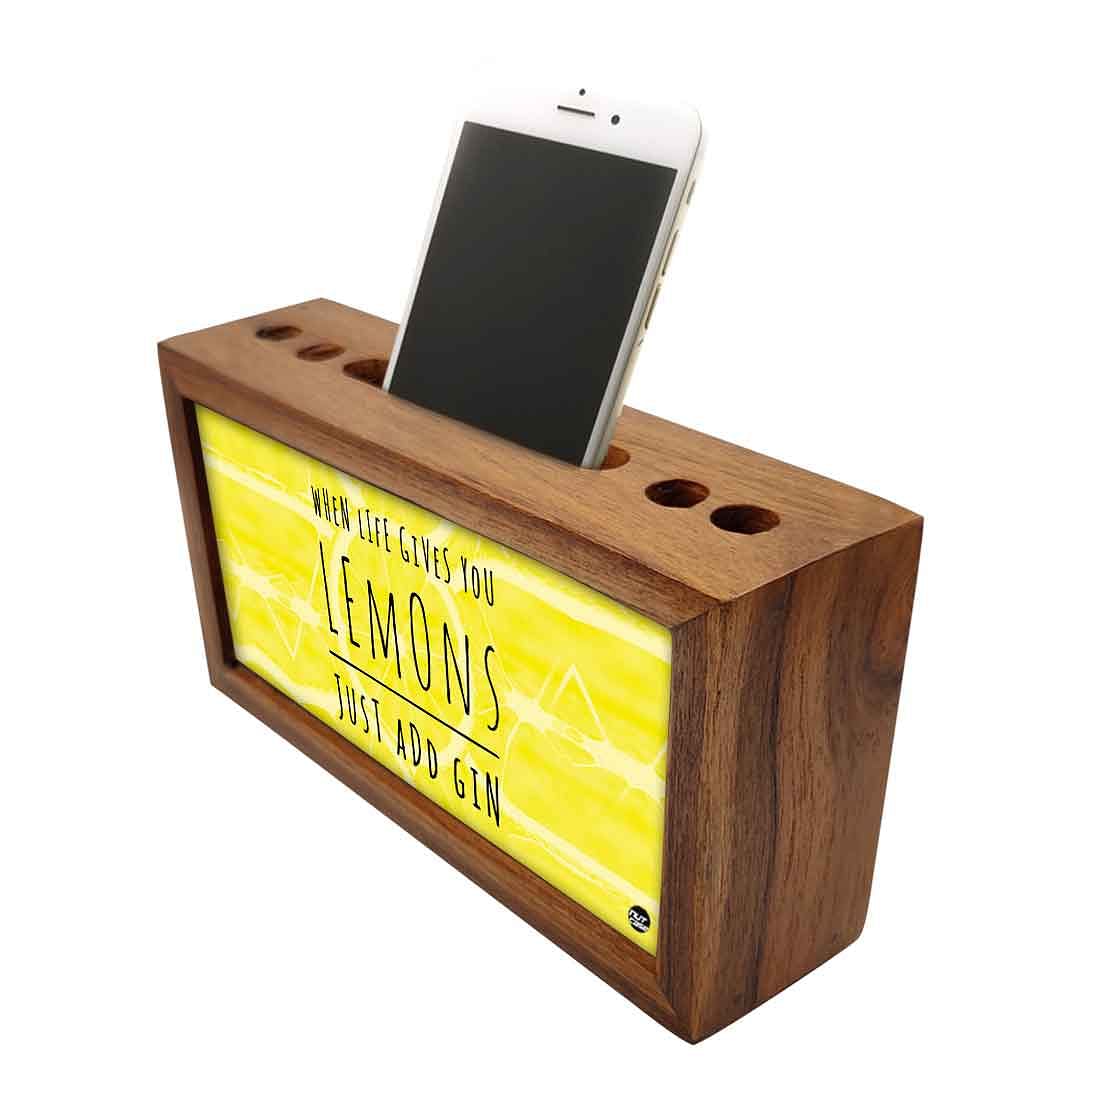 Wooden pen organizer Mobile Stand - Lemons just add gin Nutcase